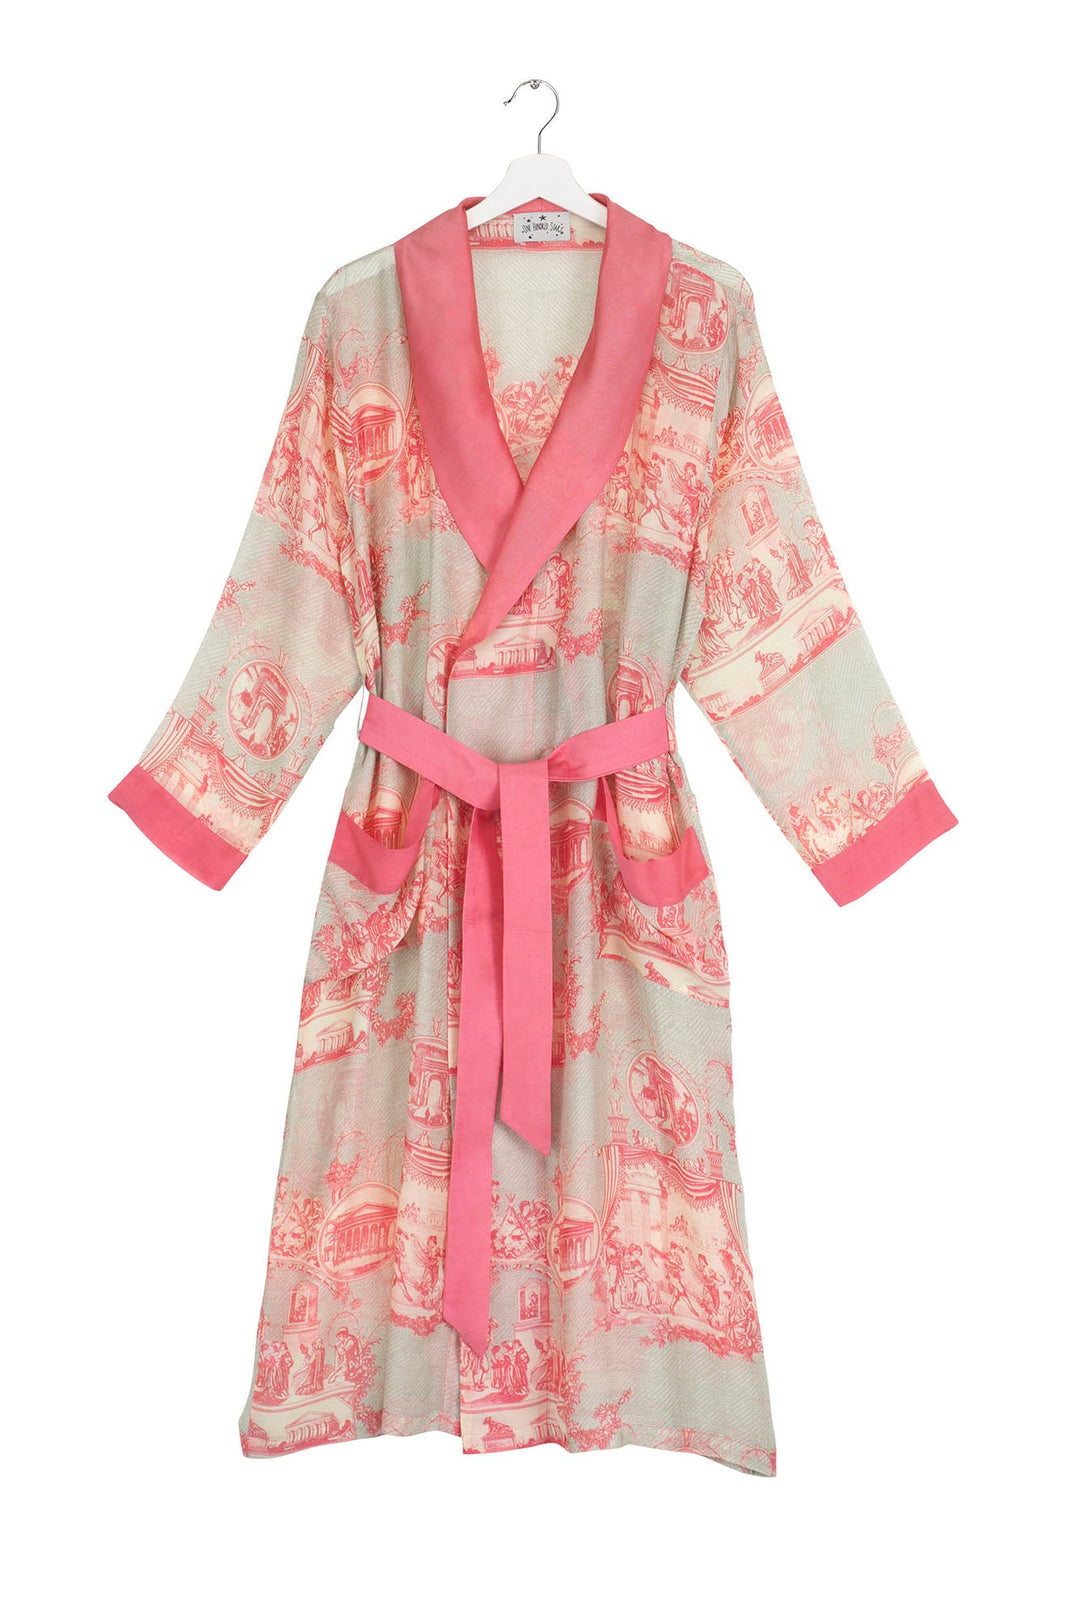 Vintage French Toile De Jouy Pink Dressing Gown